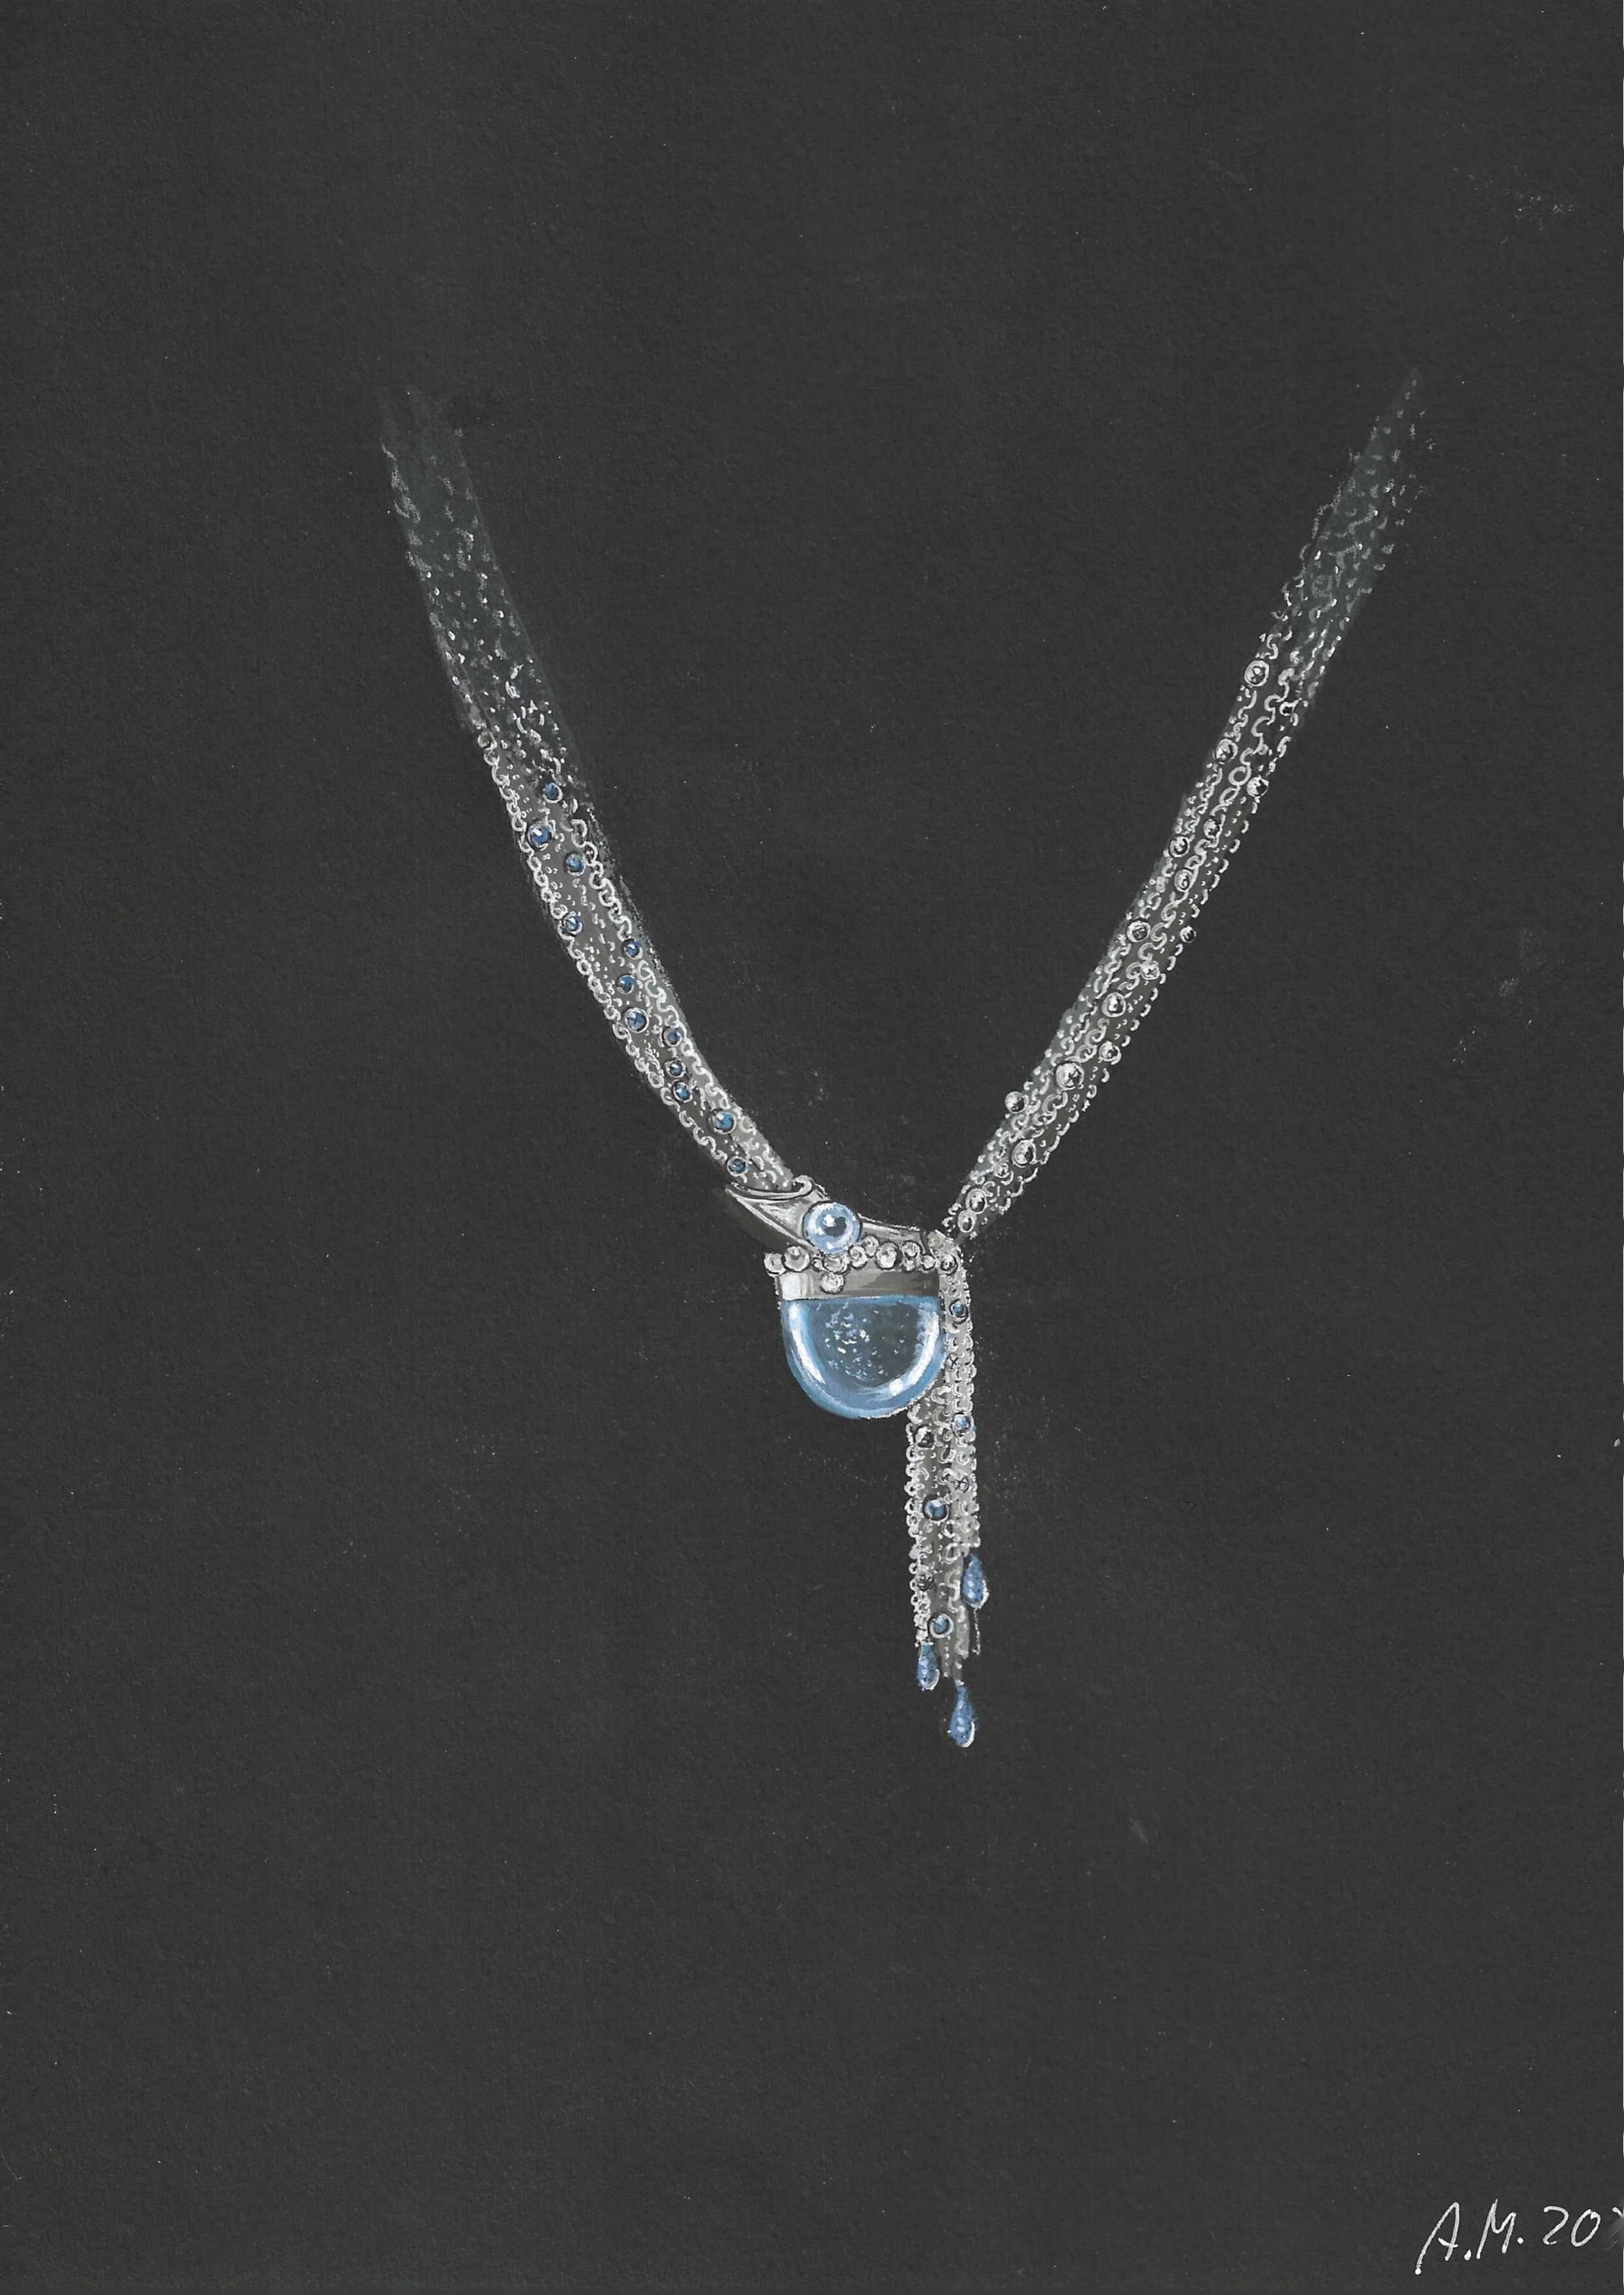 Our waterfall necklace, Acque Stellate, is made in 18K white gold. Faceted sapphires, aquamarines, and diamonds, set in donut settings, are spread like stars along the chains that spiral down to the jellyfish-like centerpiece. Tiny engraved white